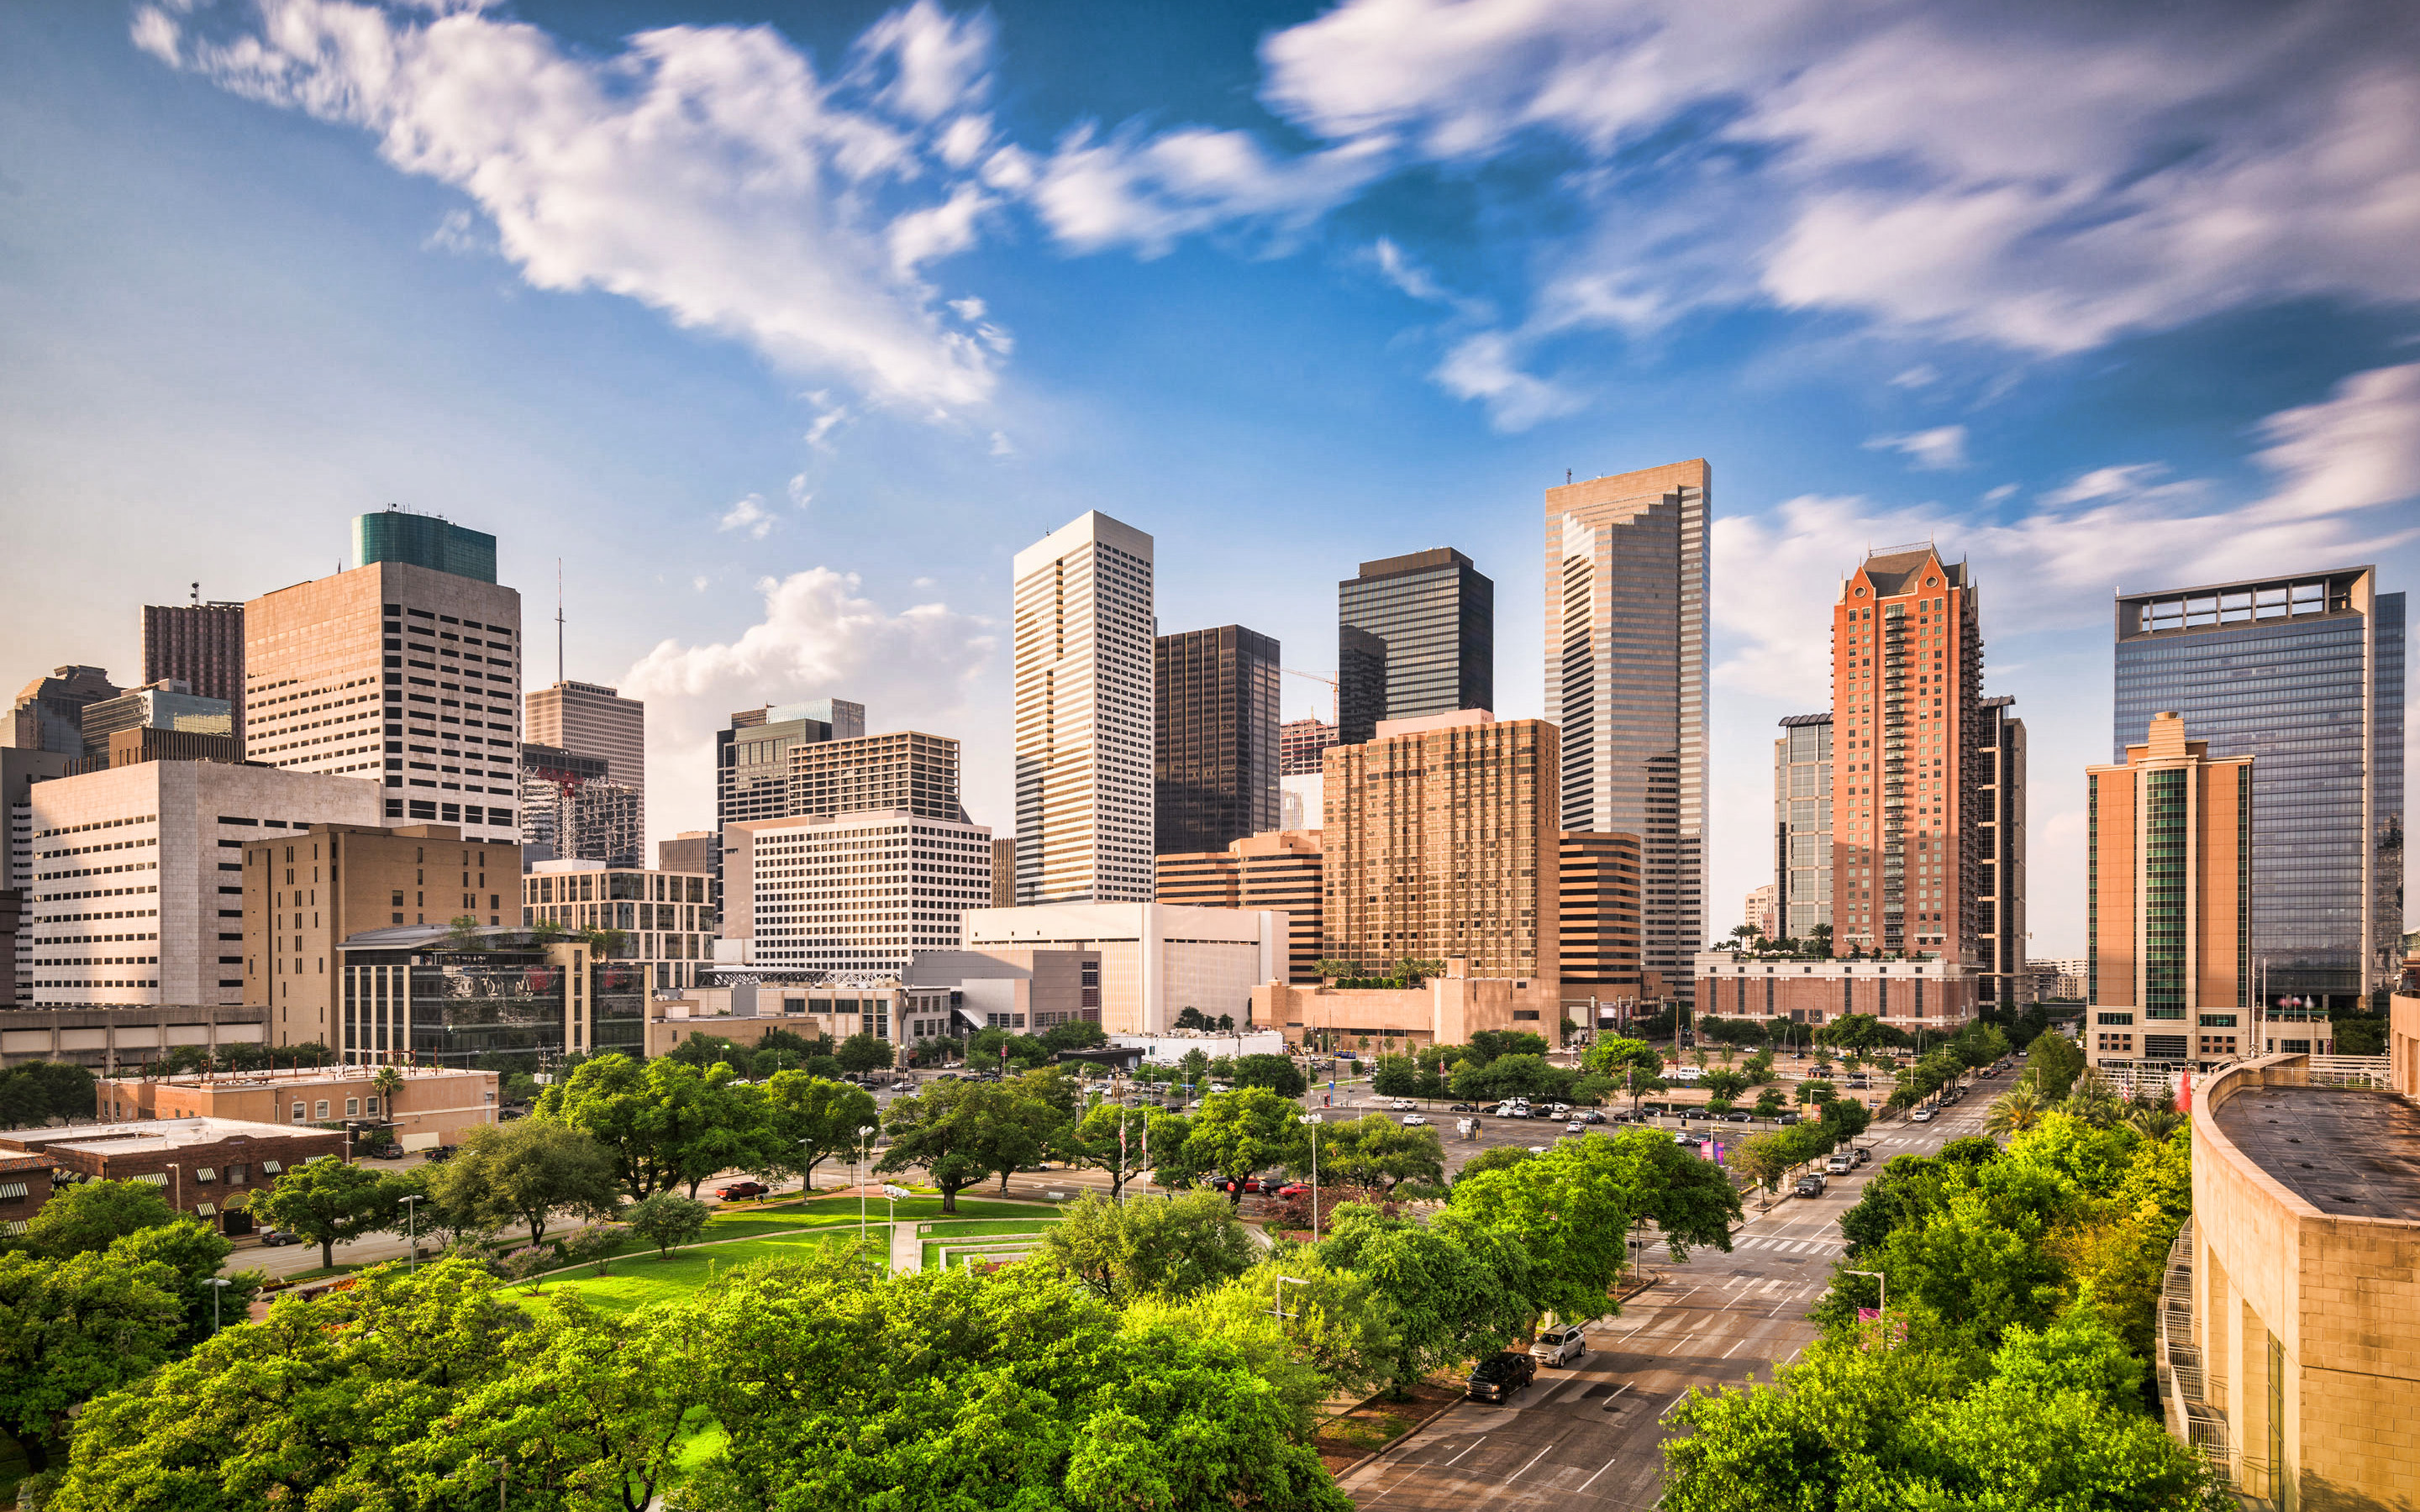 Download wallpaper Houston, evening, skyscrapers, modern buildings, park, Houston cityscape, Texas, USA for desktop with resolution 2880x1800. High Quality HD picture wallpaper